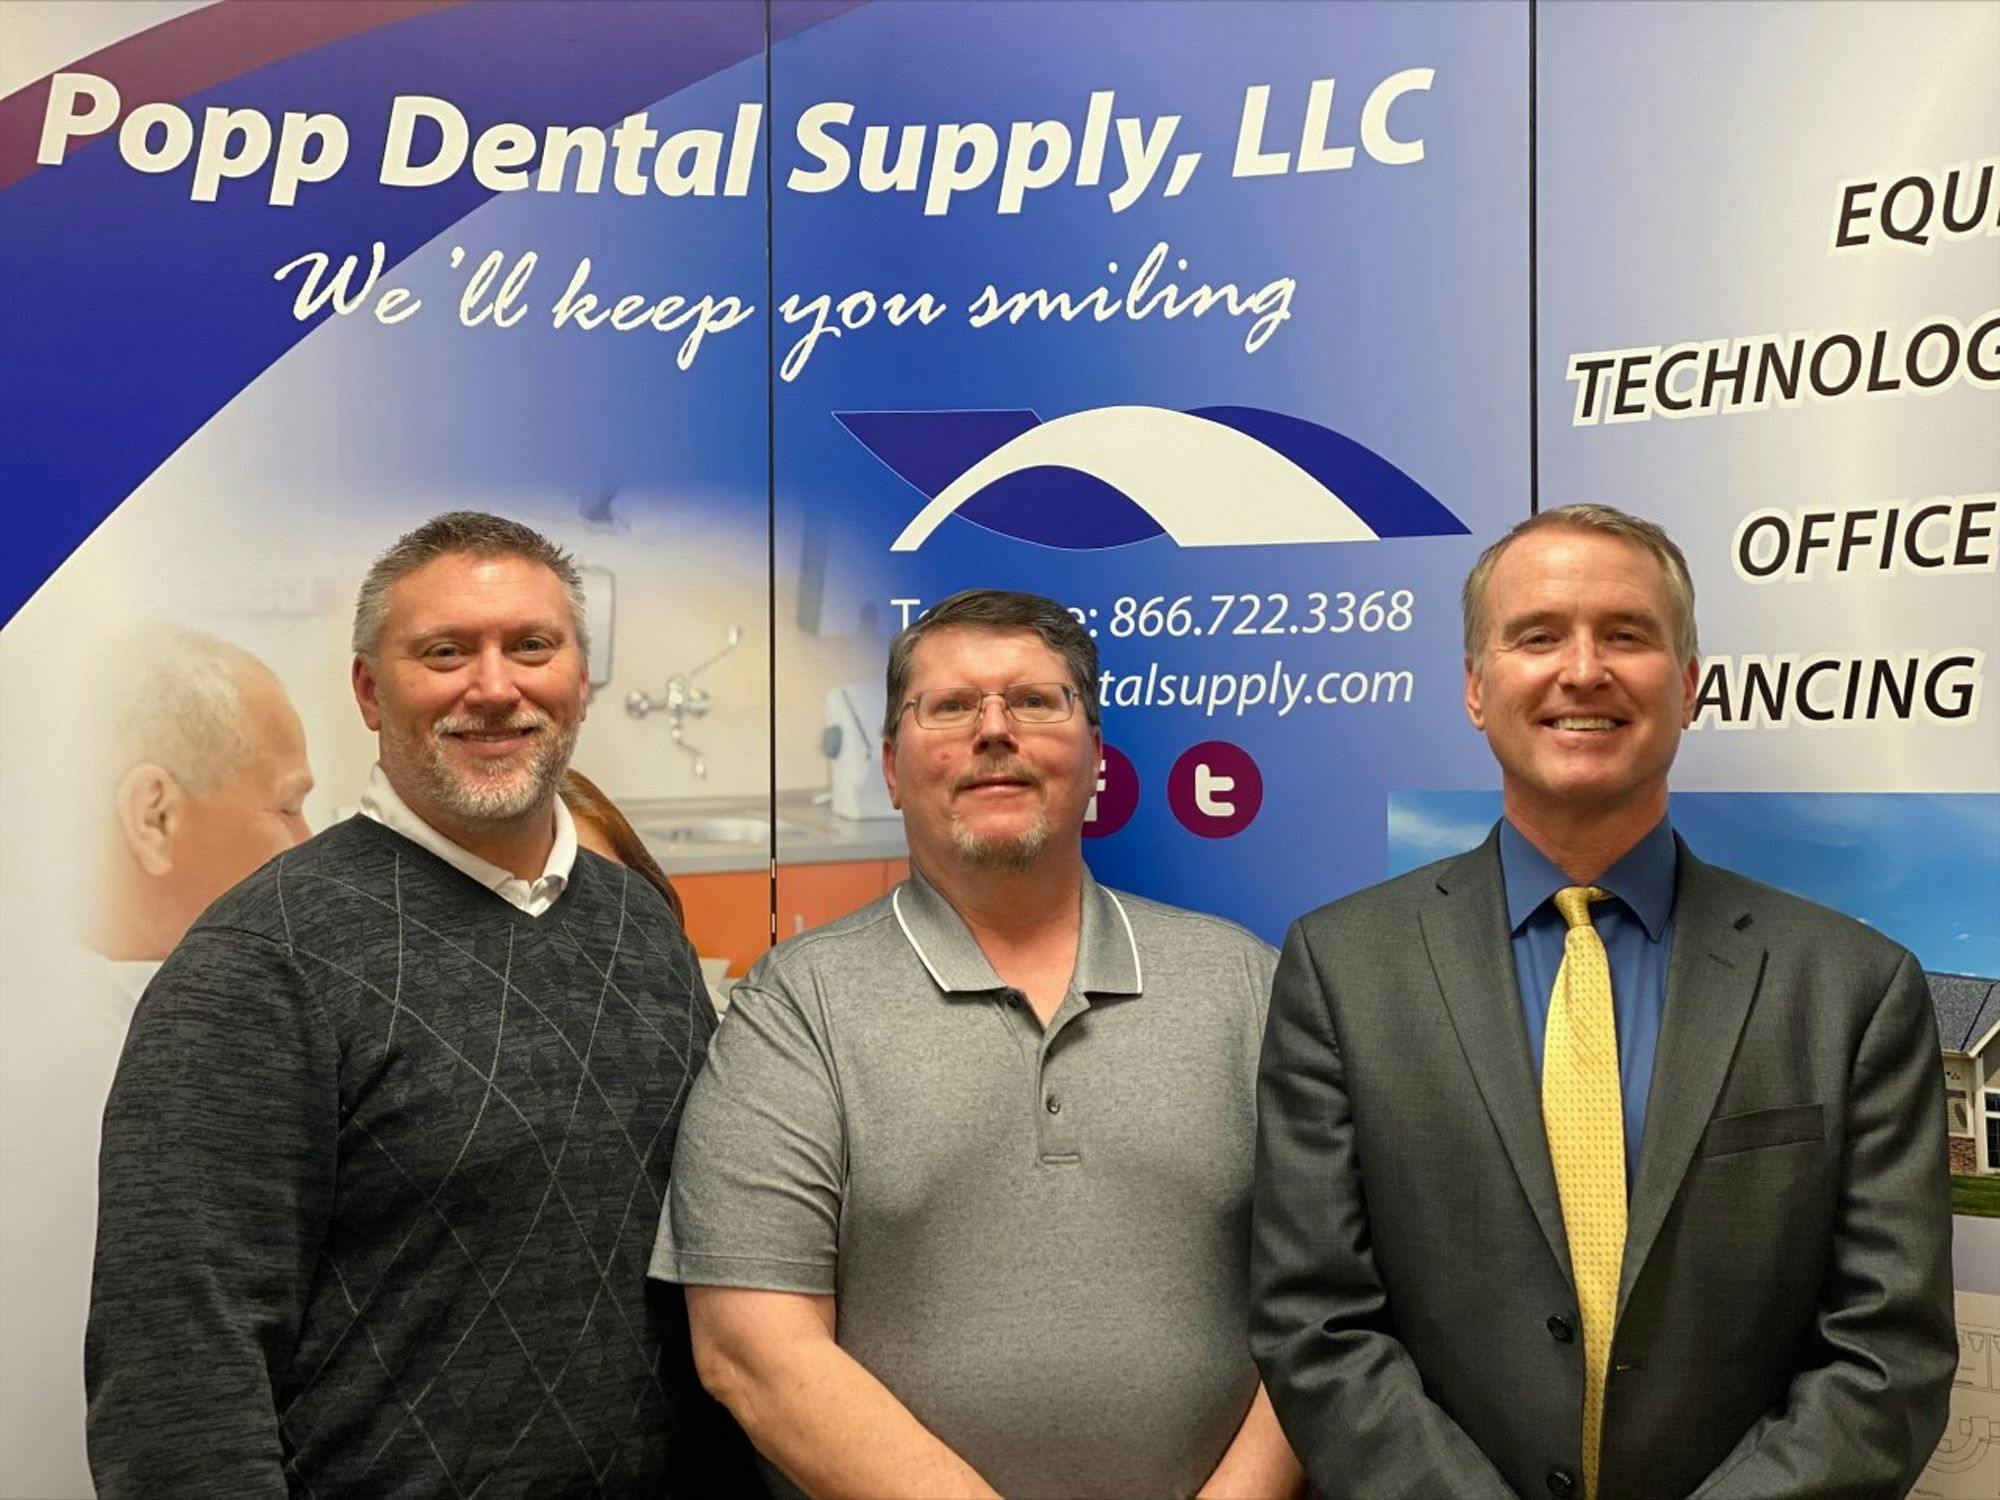 PoppDental Supply owners, from left, Tim Nielson, President, Dave Kelsay,  General Manager and John Przybyla, Outside Sales. Absent from photo: James Brown. Benco Dental Acquires Popp Dental Supply. 